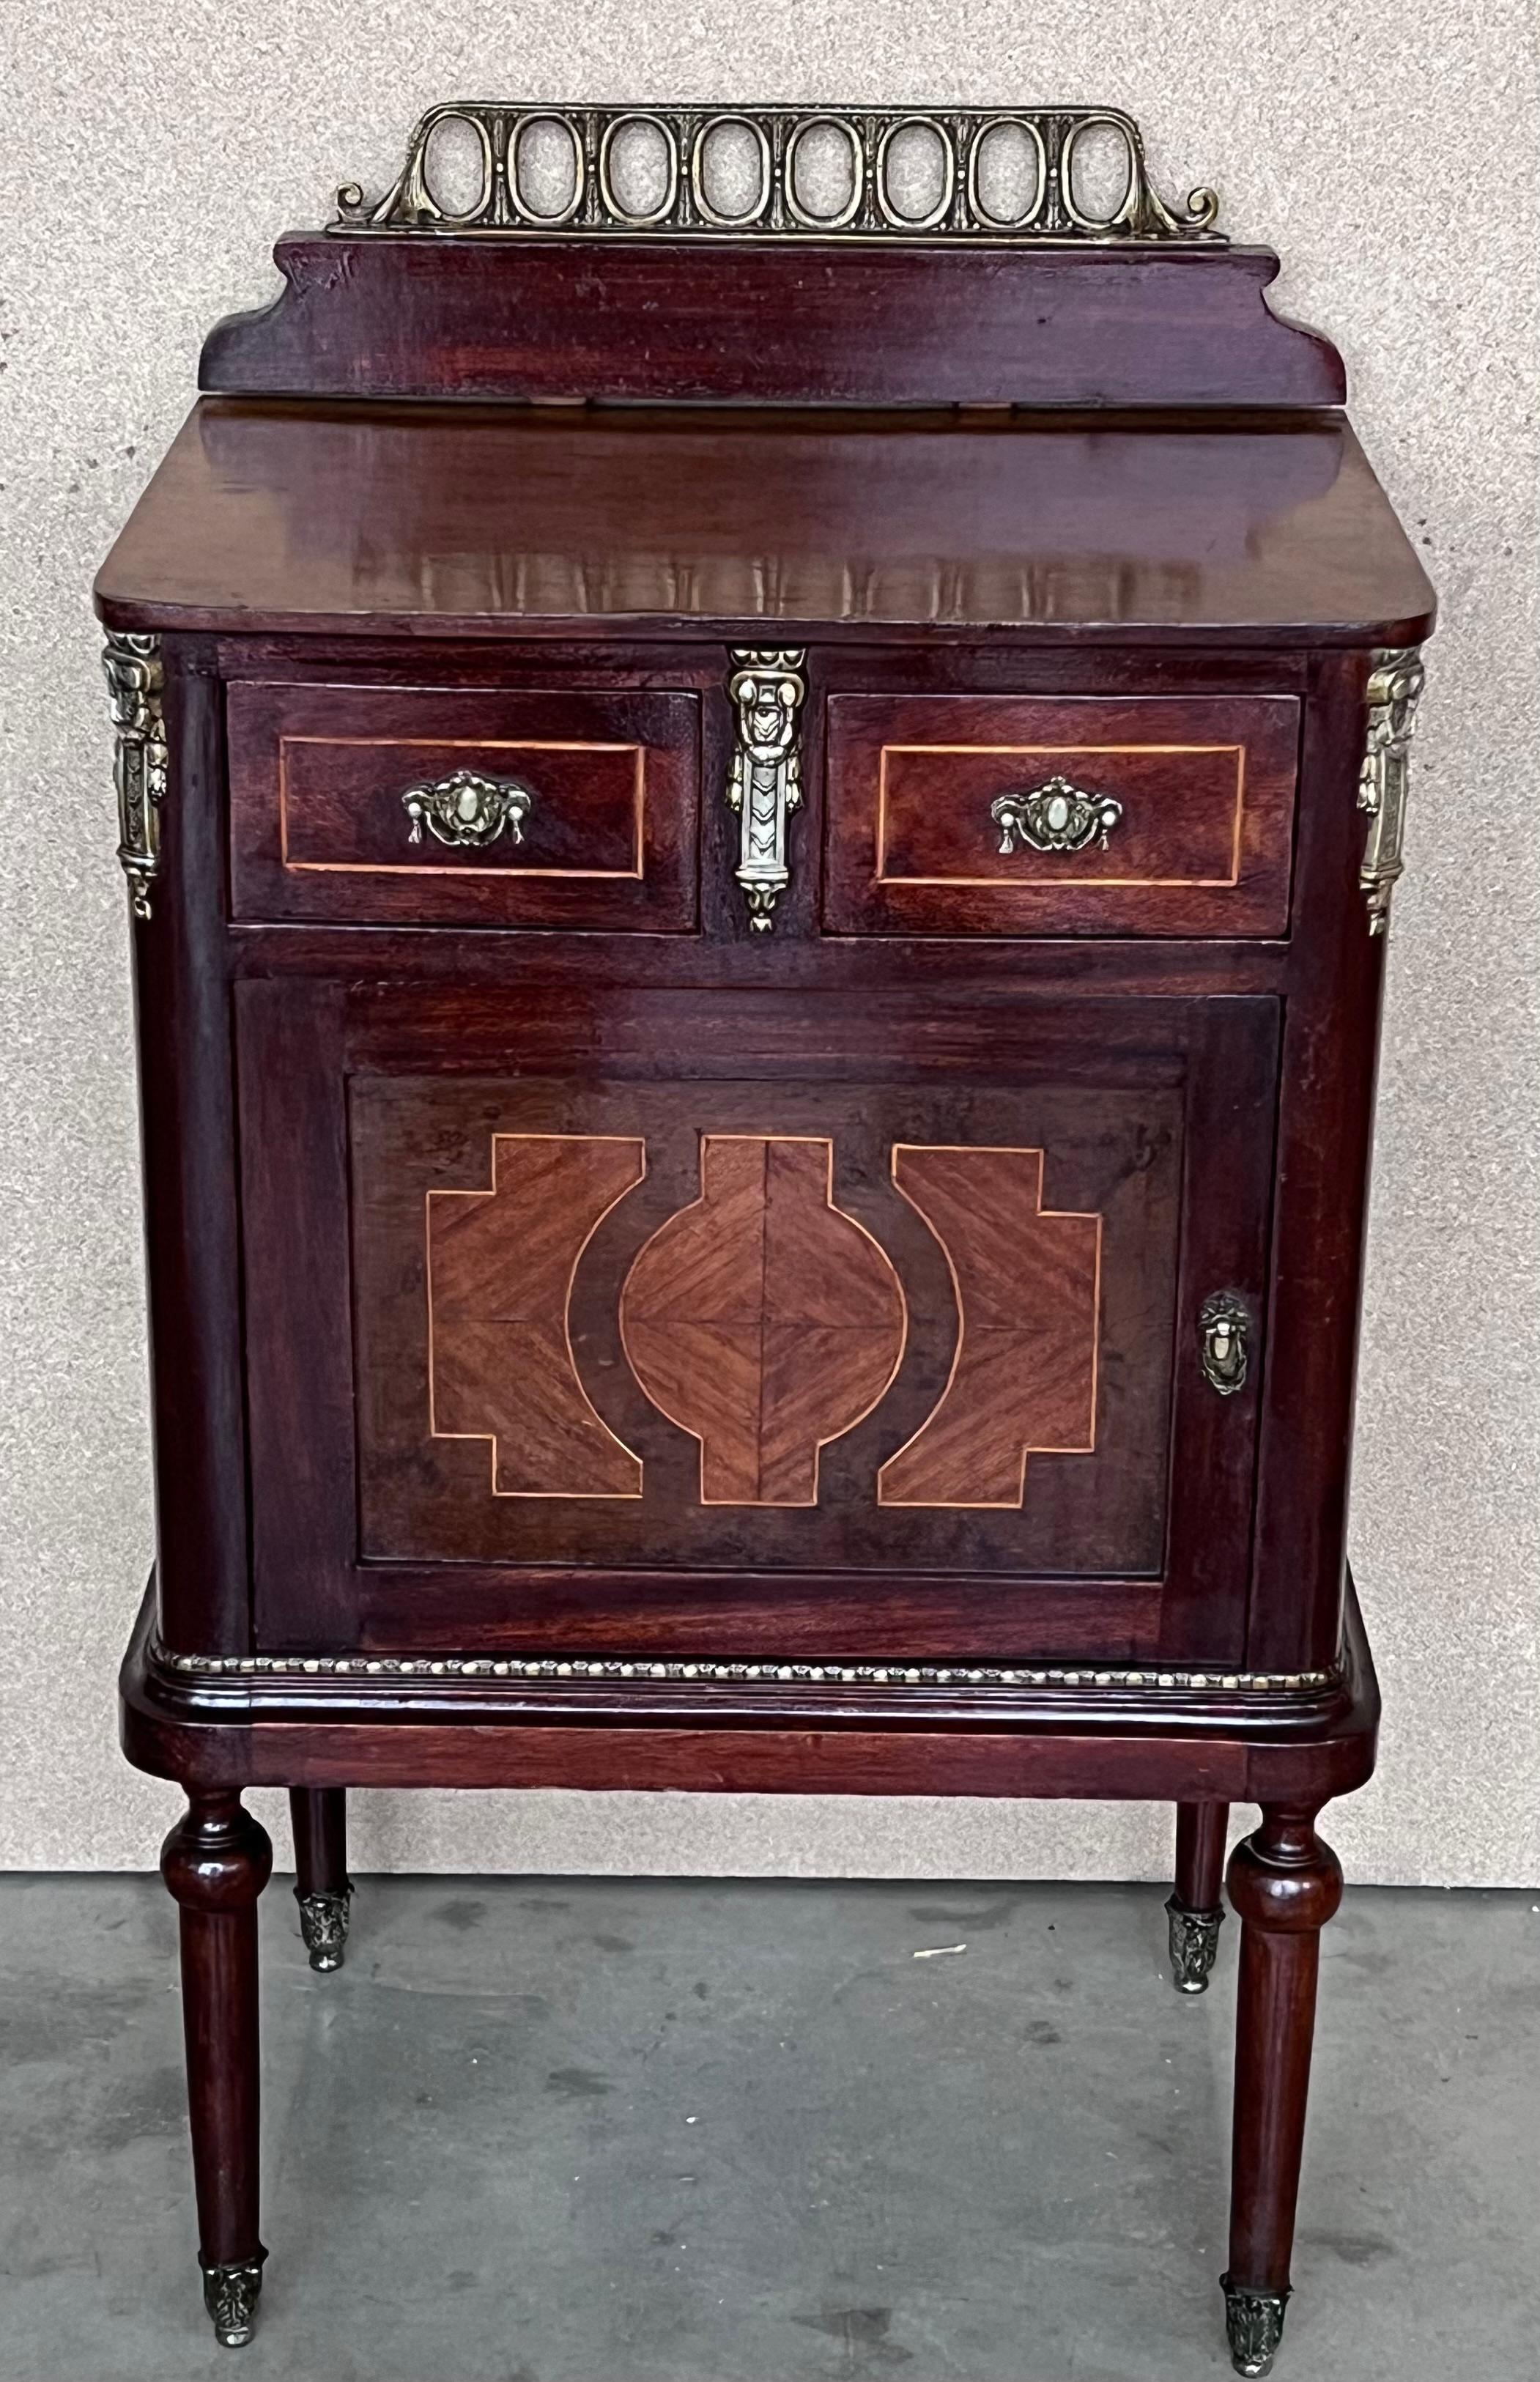 Pair of Italian Marquetry Nightstands with Bronze Crest, drawers and doors.
Little drawers in higher part and door. Both drawers and door with marquetry.